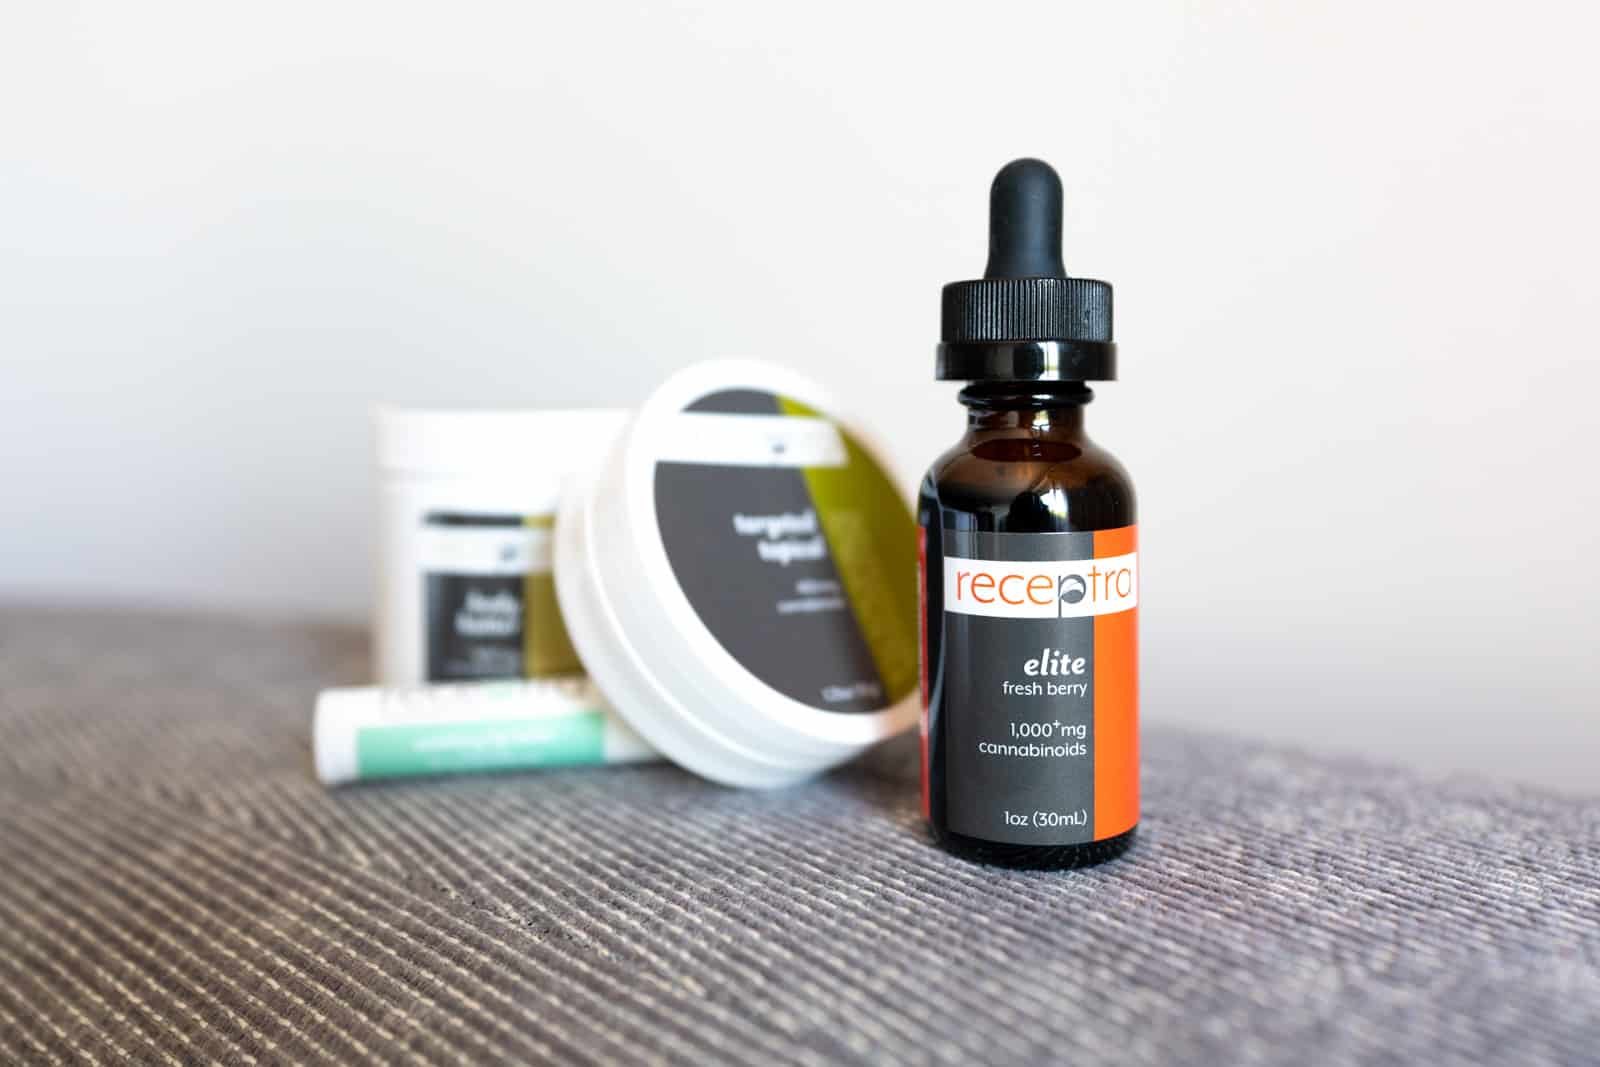 Review of Receptra Naturals Active CBD oil - Different products from Receptra - Lost With Purpose travel blog